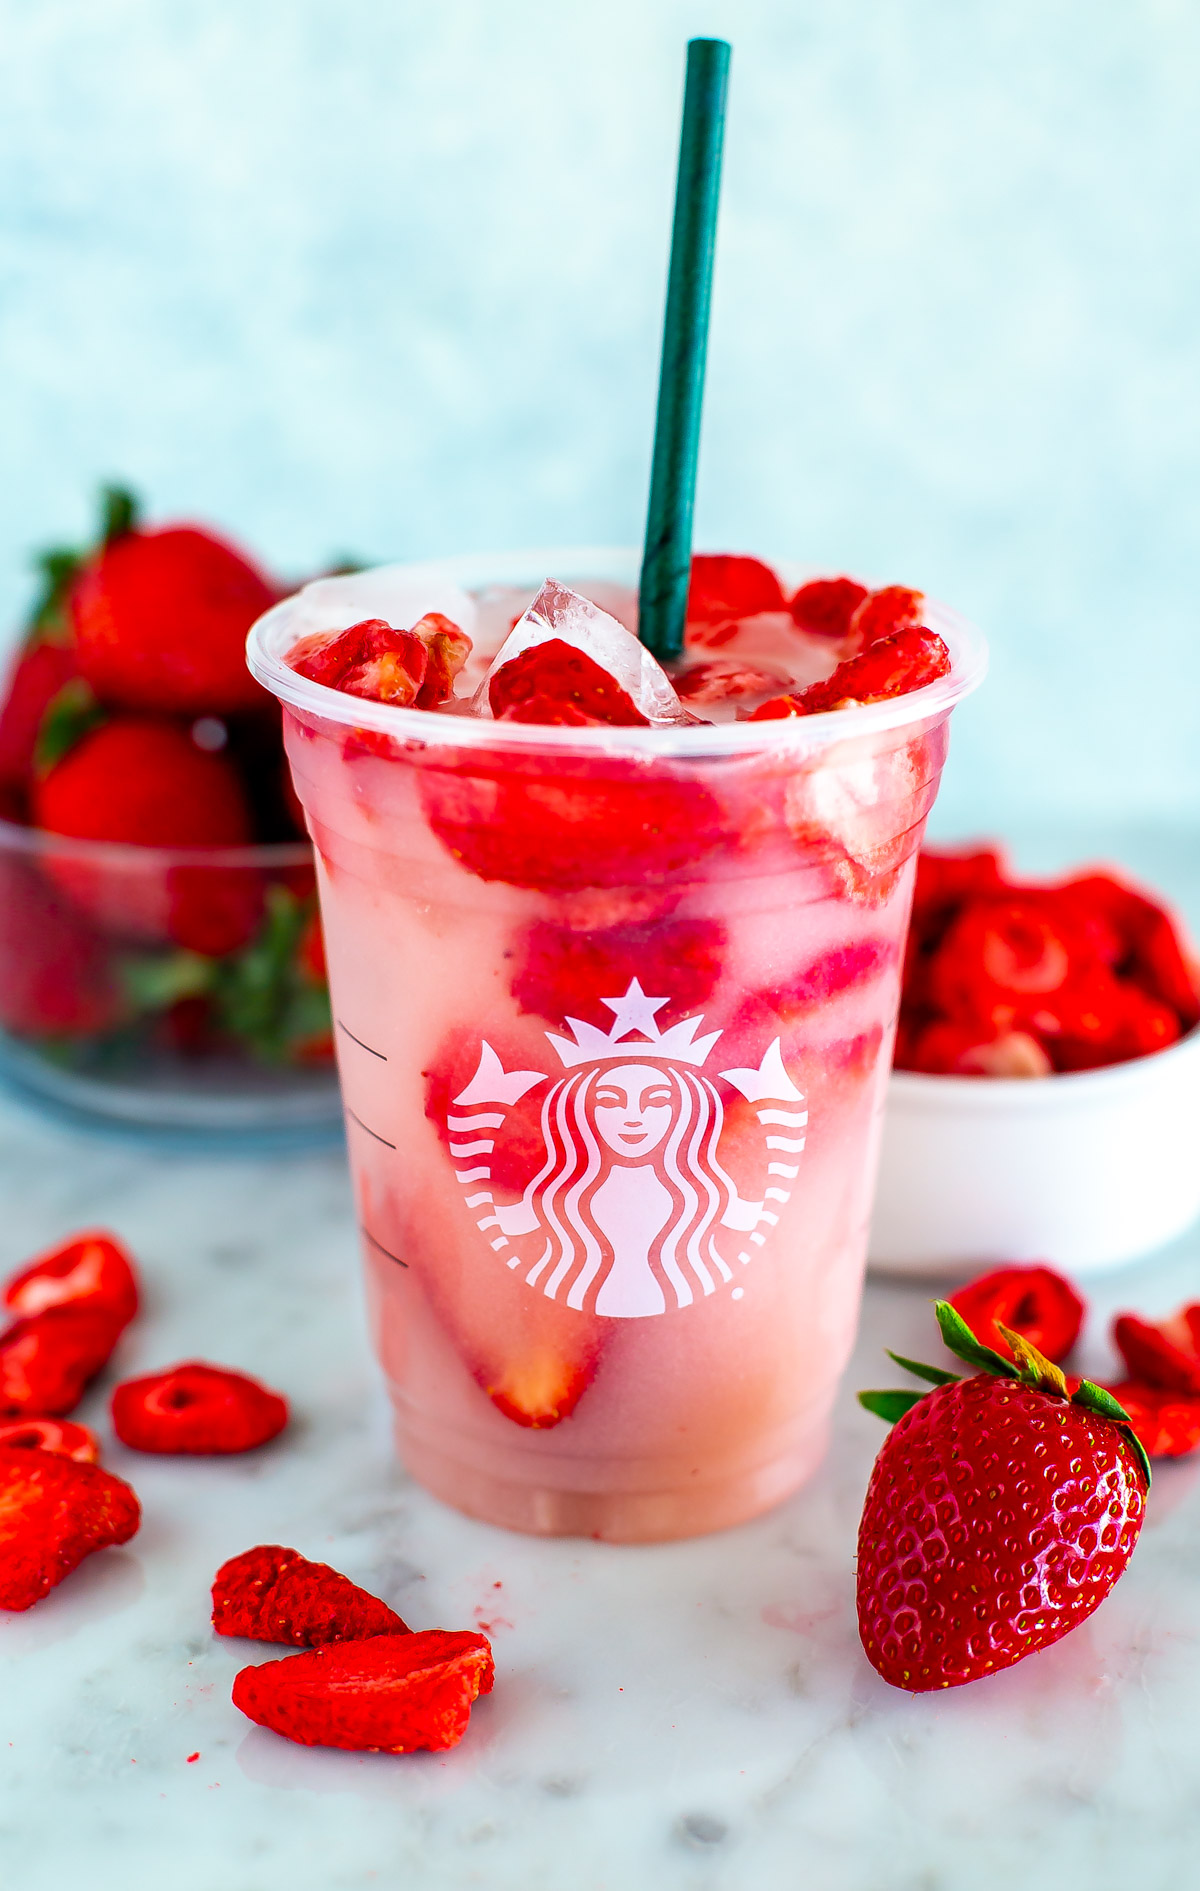 A glass of homemade Starbucks pink drink surrounded by strawberries.